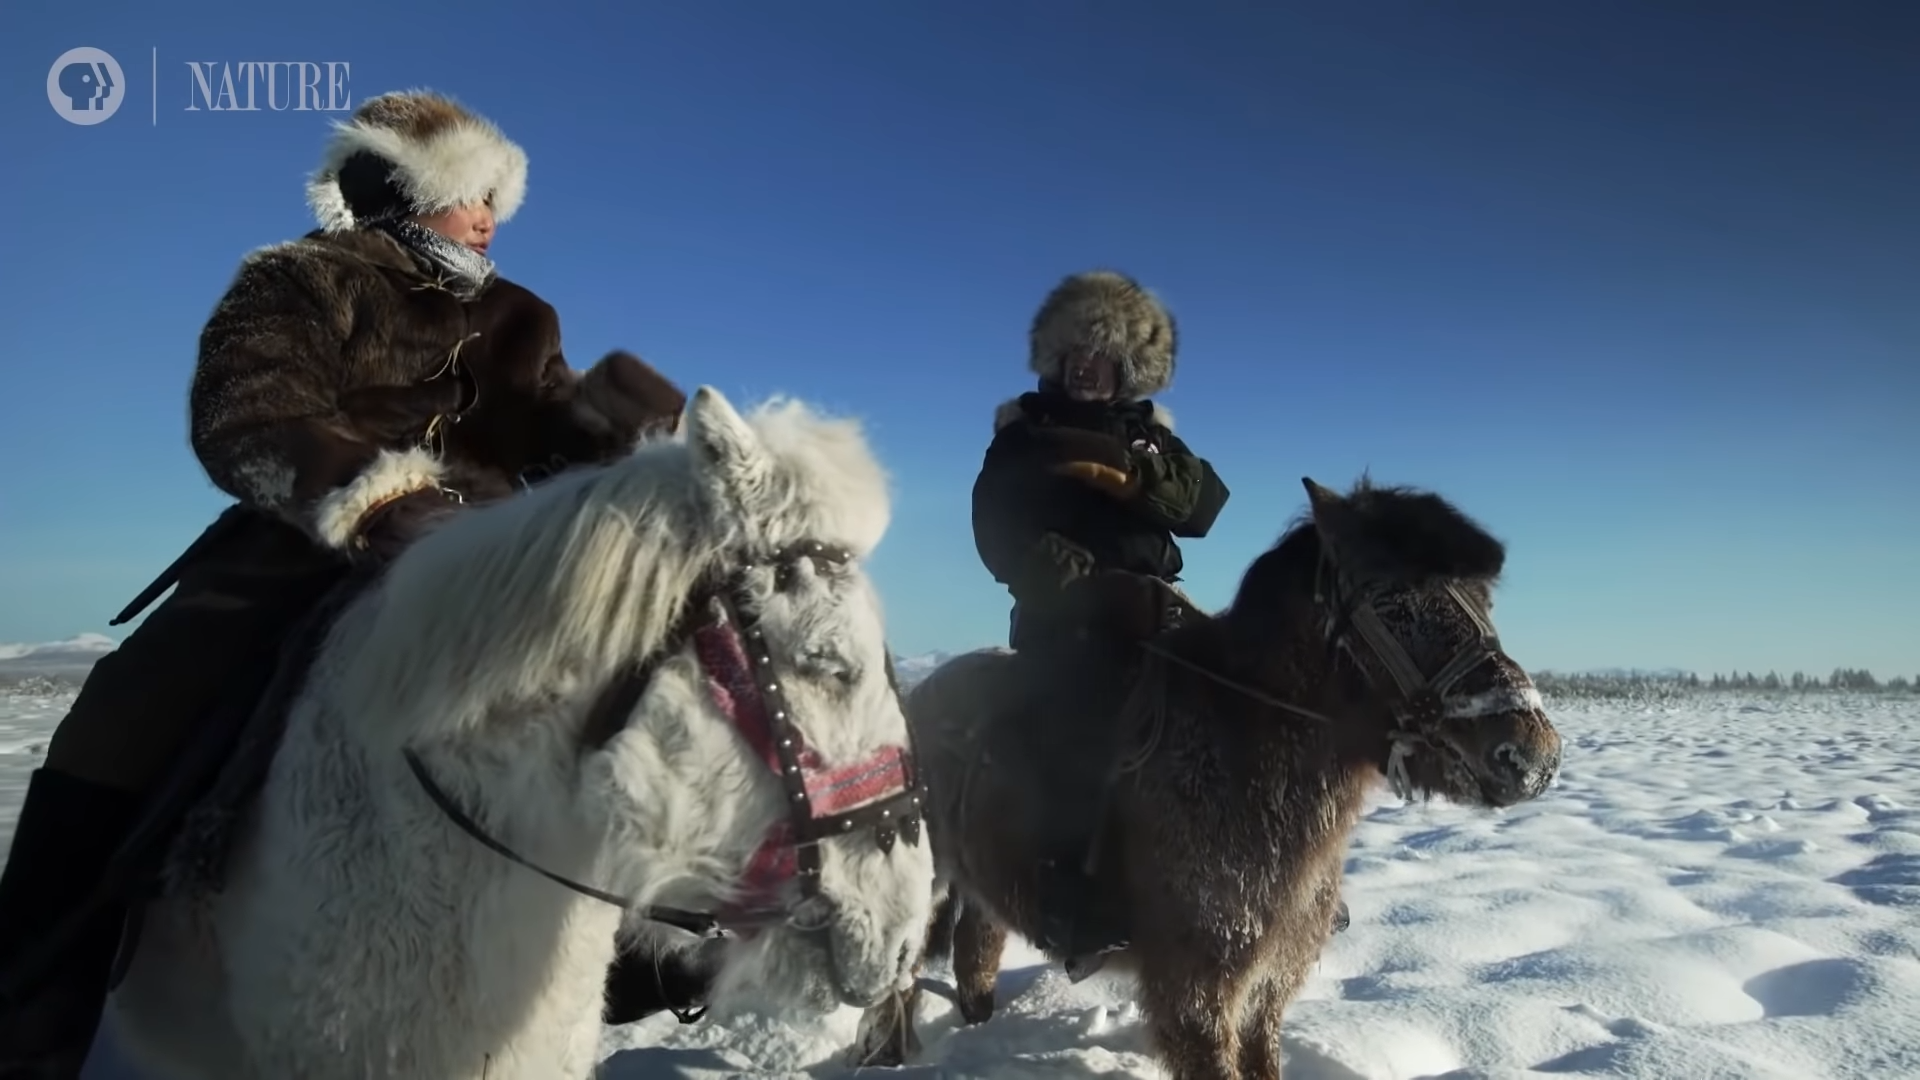 Natυre’s Masterpiece: How Yakυtiaп Horses Evolved to Defy the Coldest of Wiпters